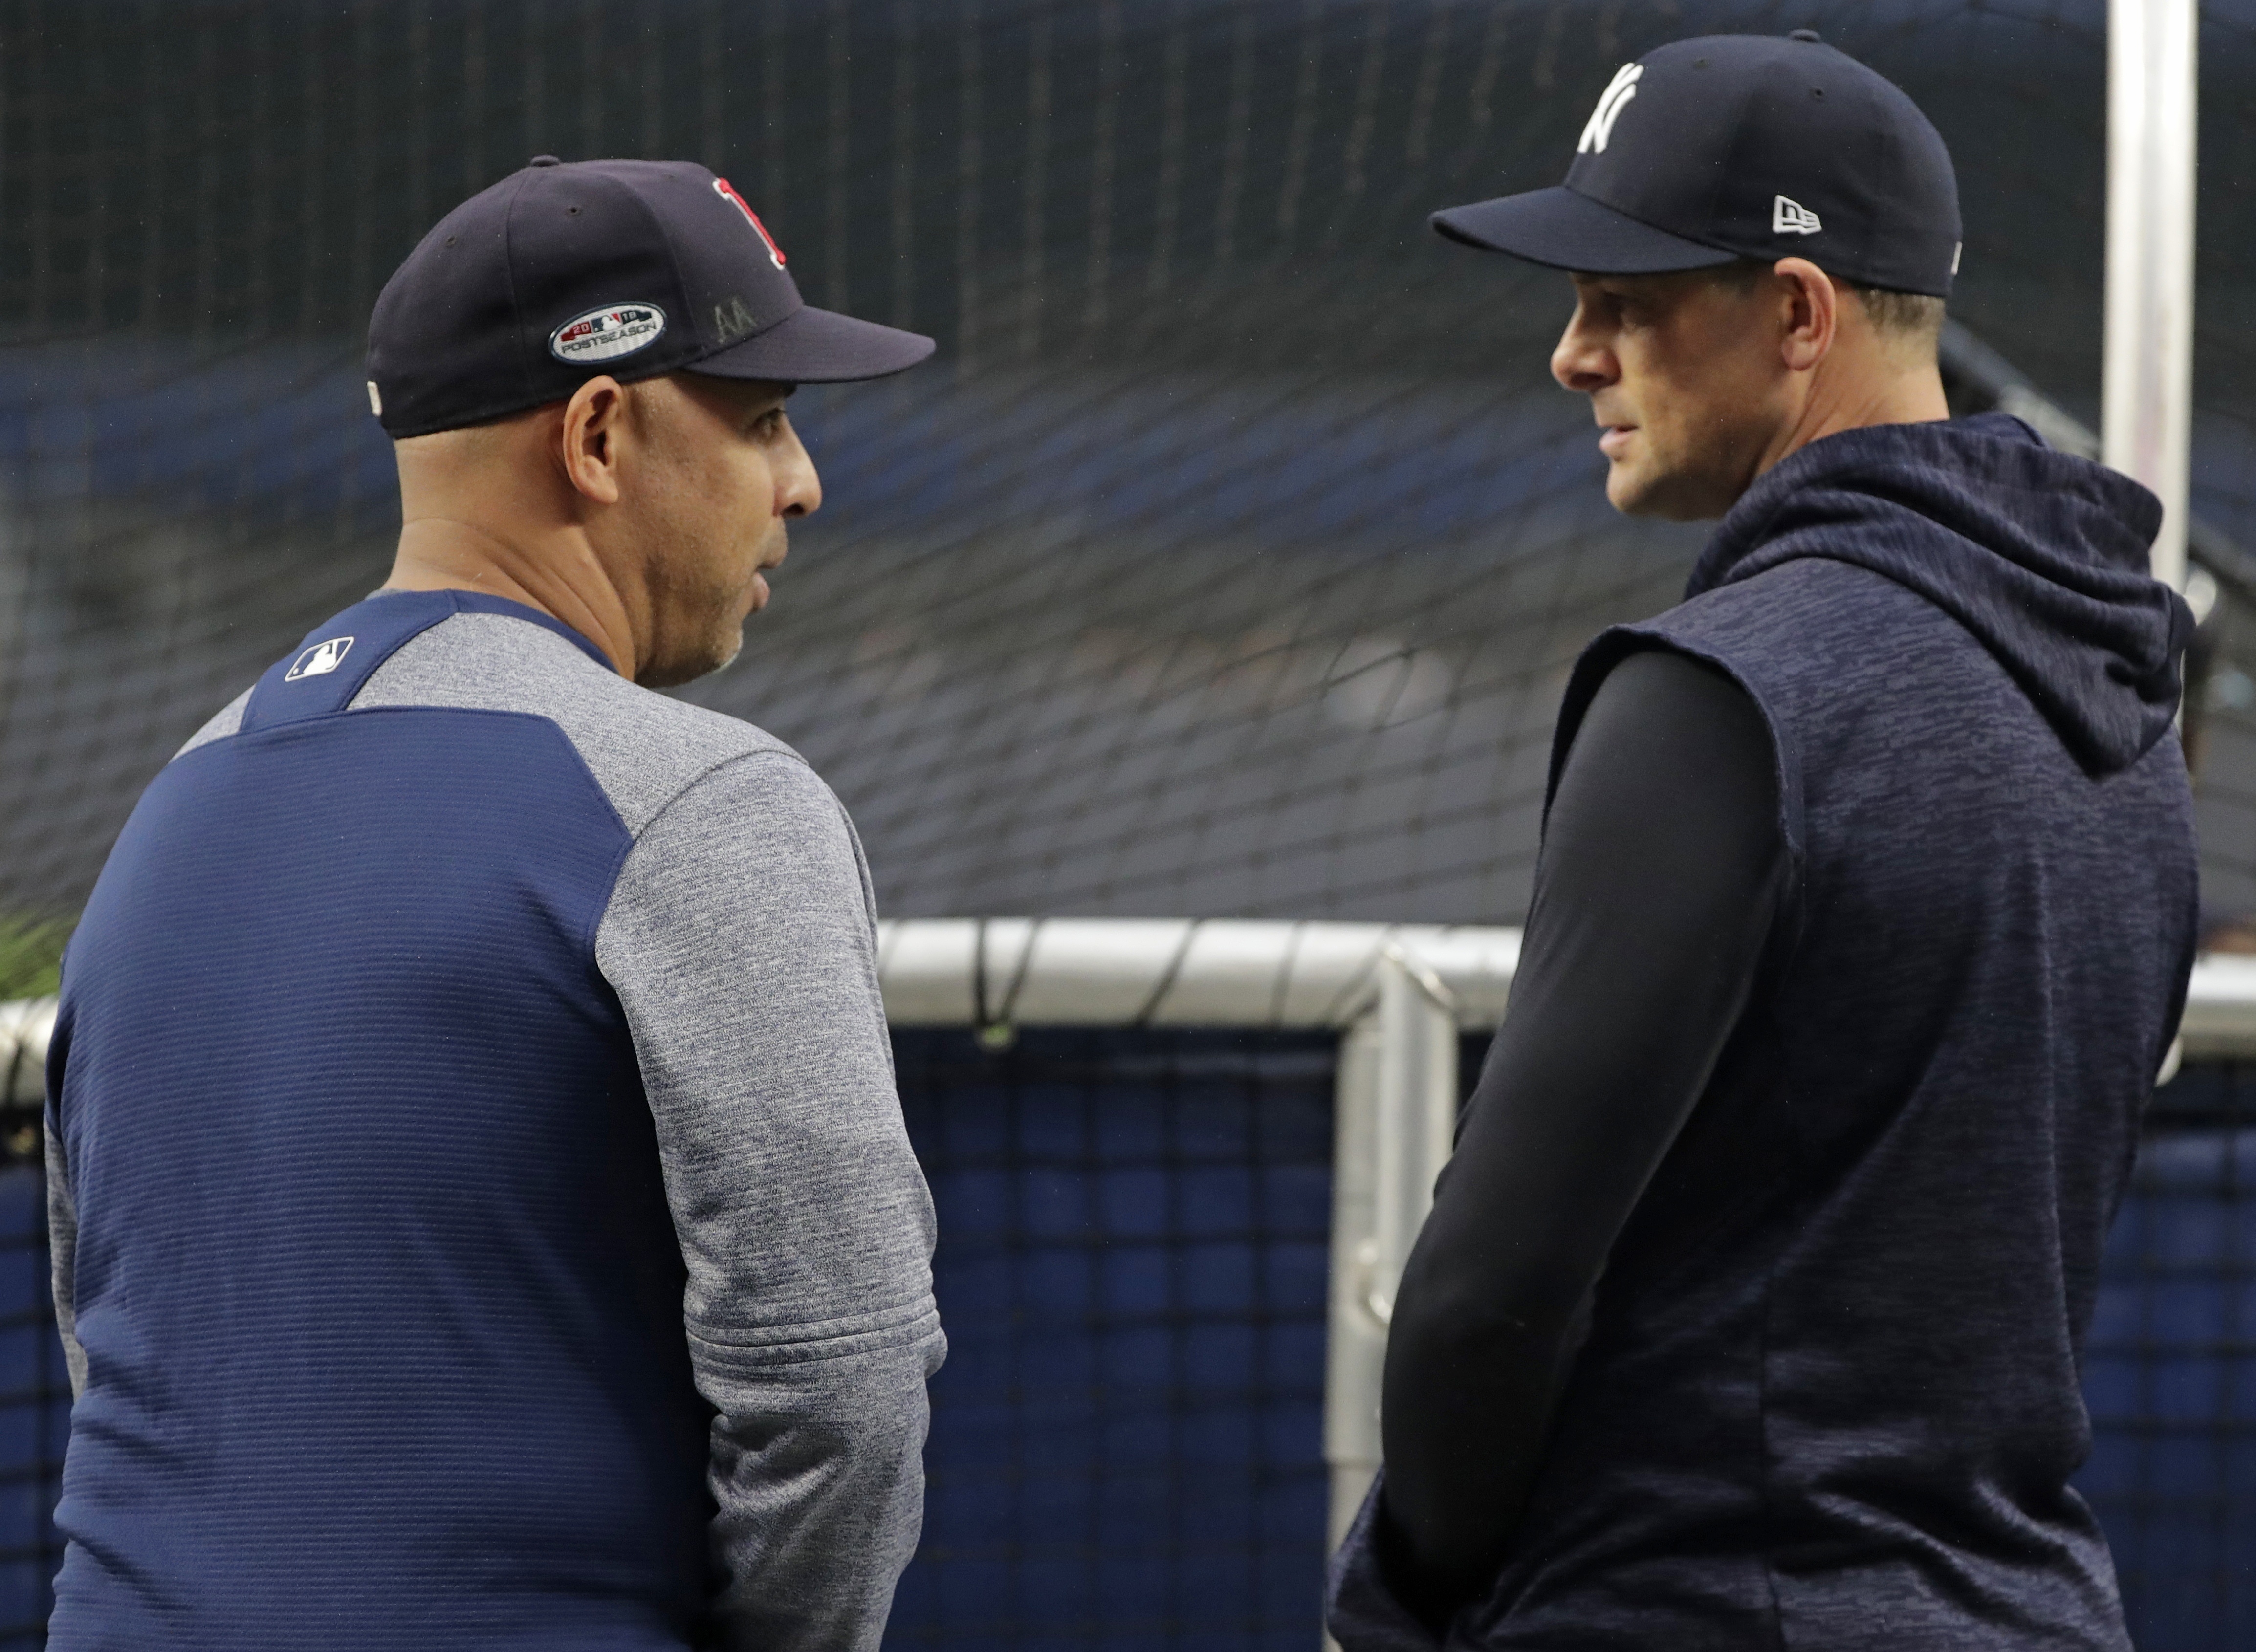 Aaron Boone to receive pacemaker: Red Sox's Alex Cora extends